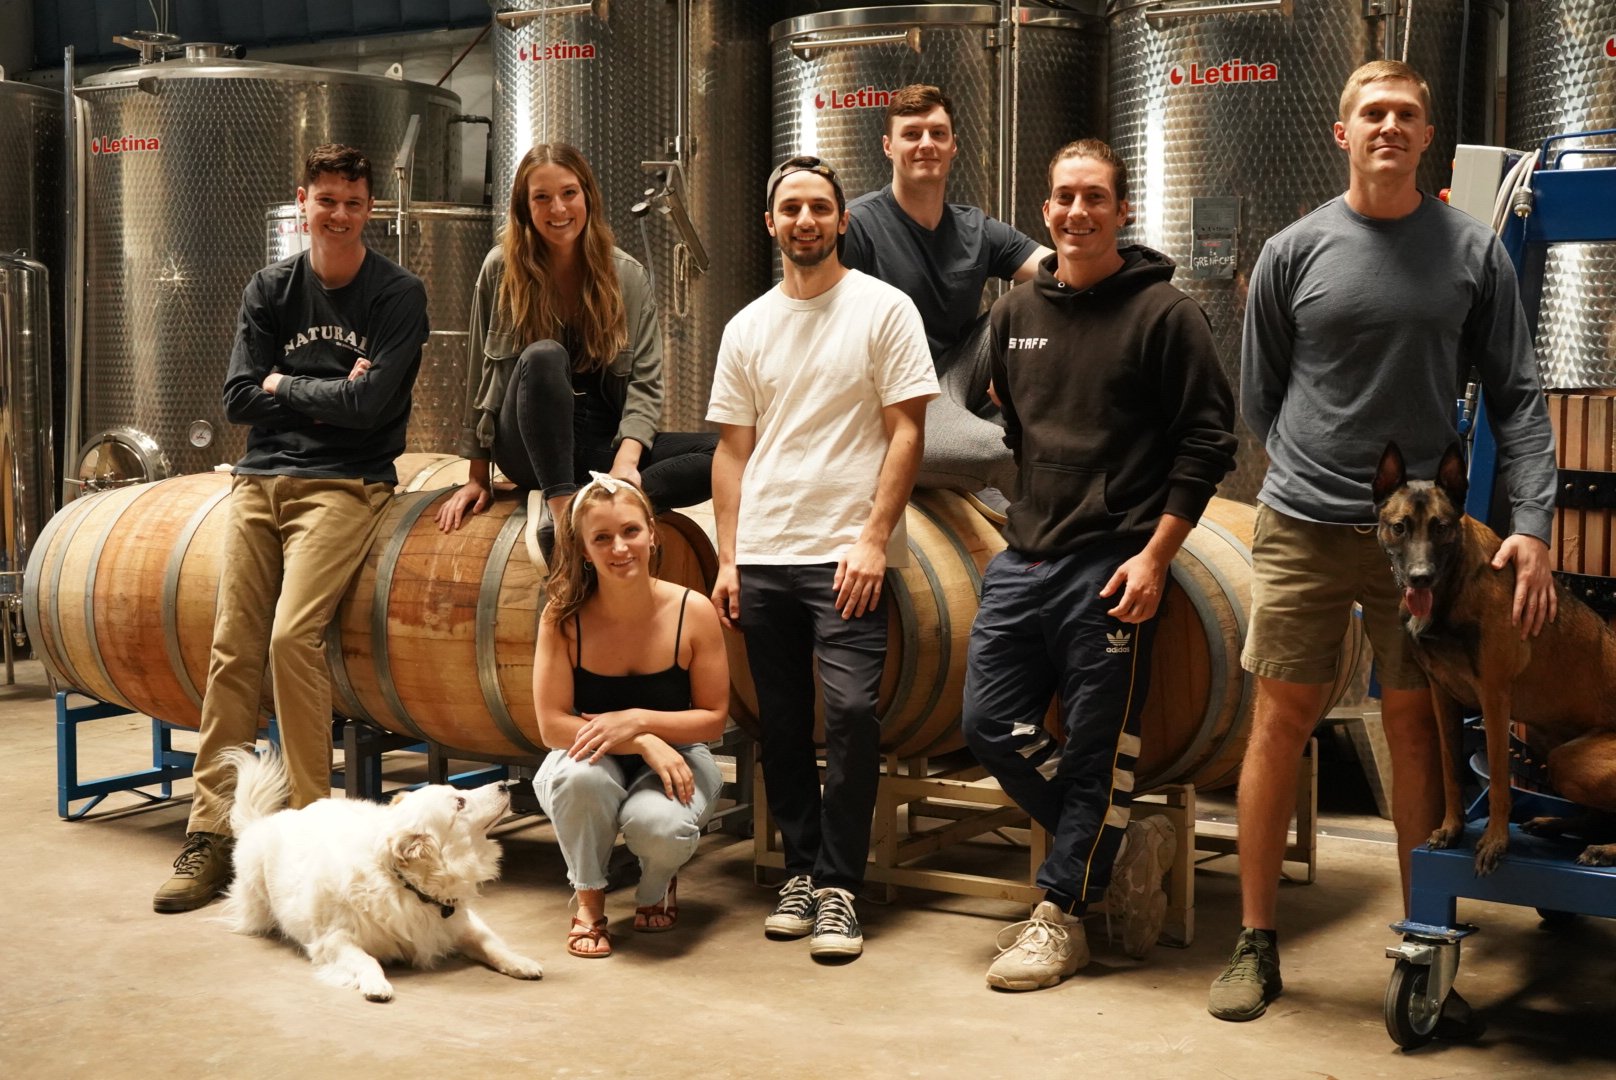 Austin Winery: American Winemakers in an Urban City